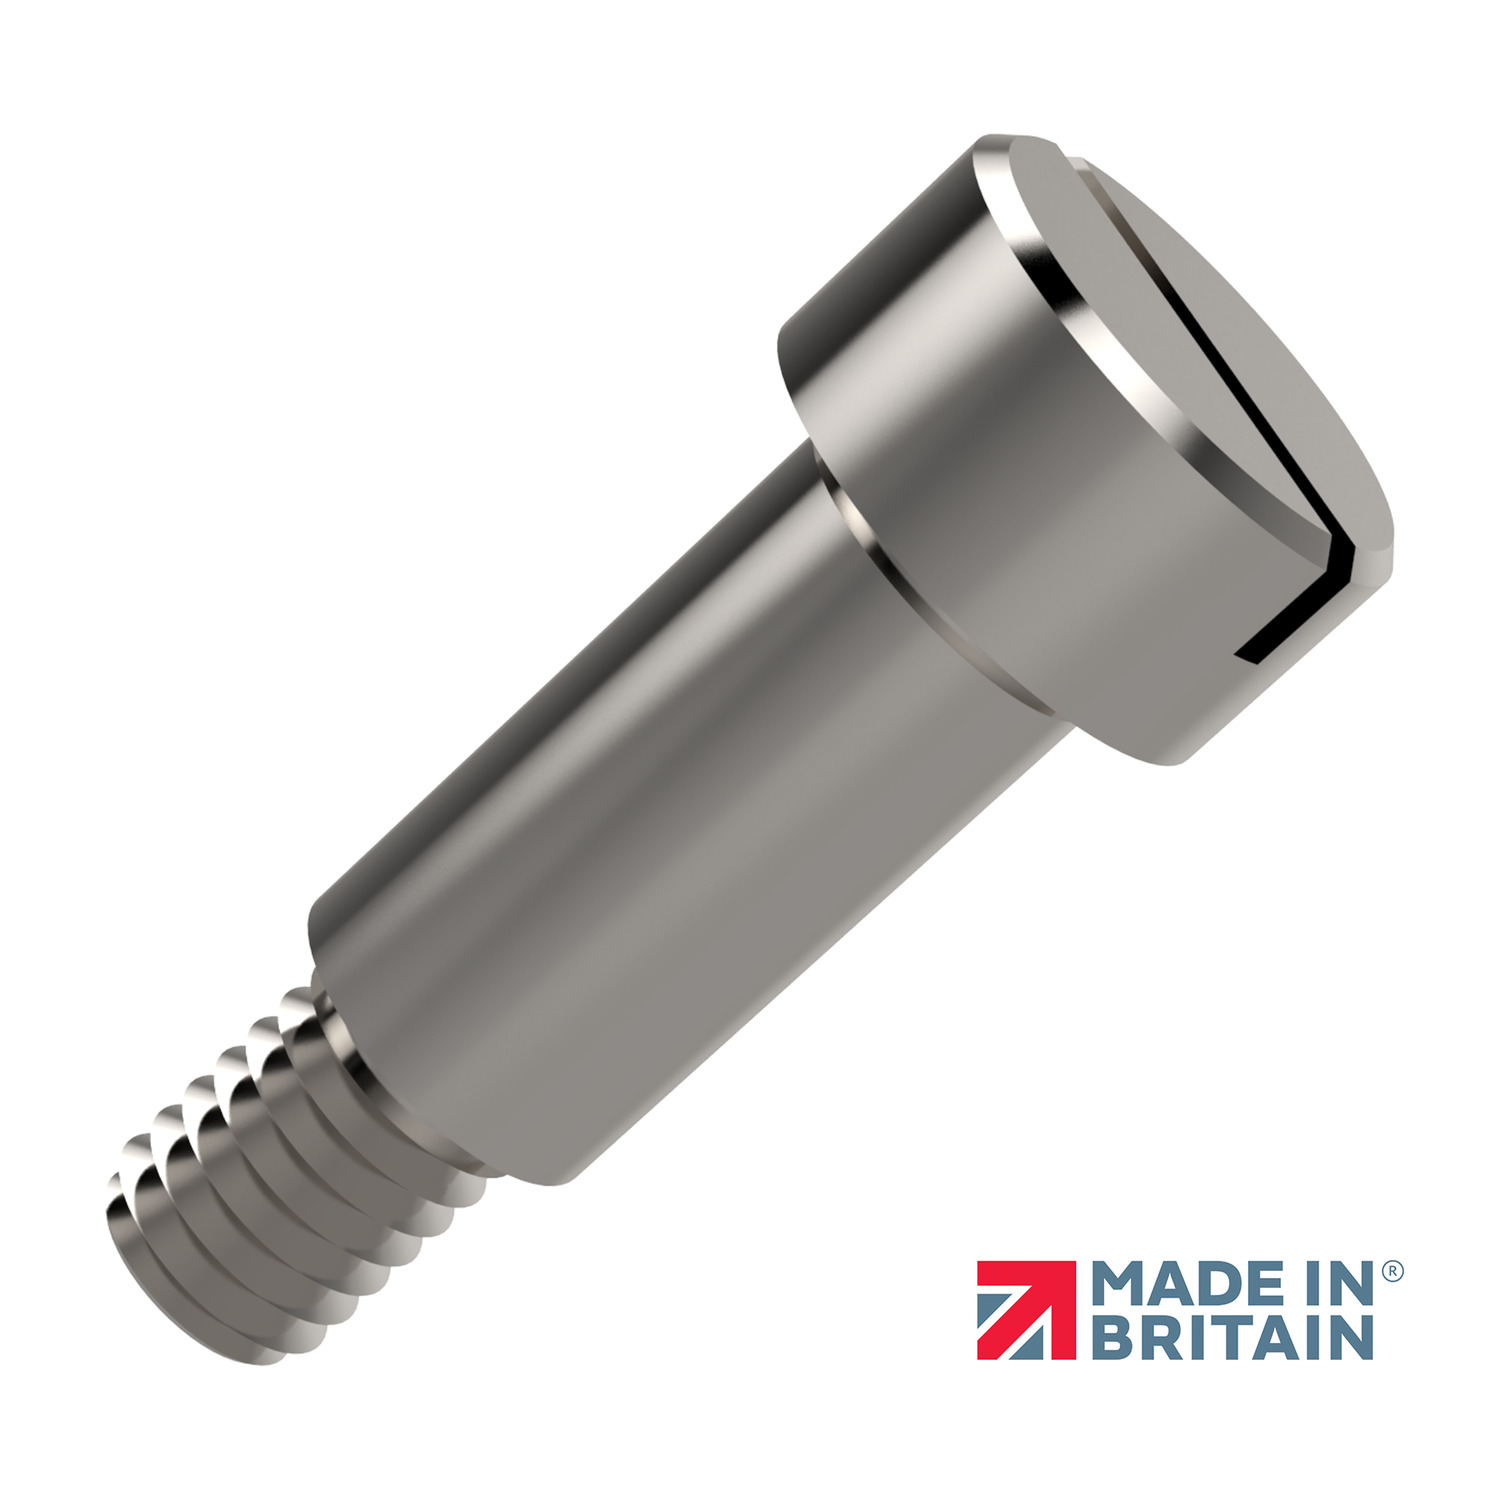 Shoulder Screws - Slot Head Slot head shoulder screw in 416 series stainless steel (this is a martensitic s/s grade and is therefore magnetic - see our stainless steel technical information here).